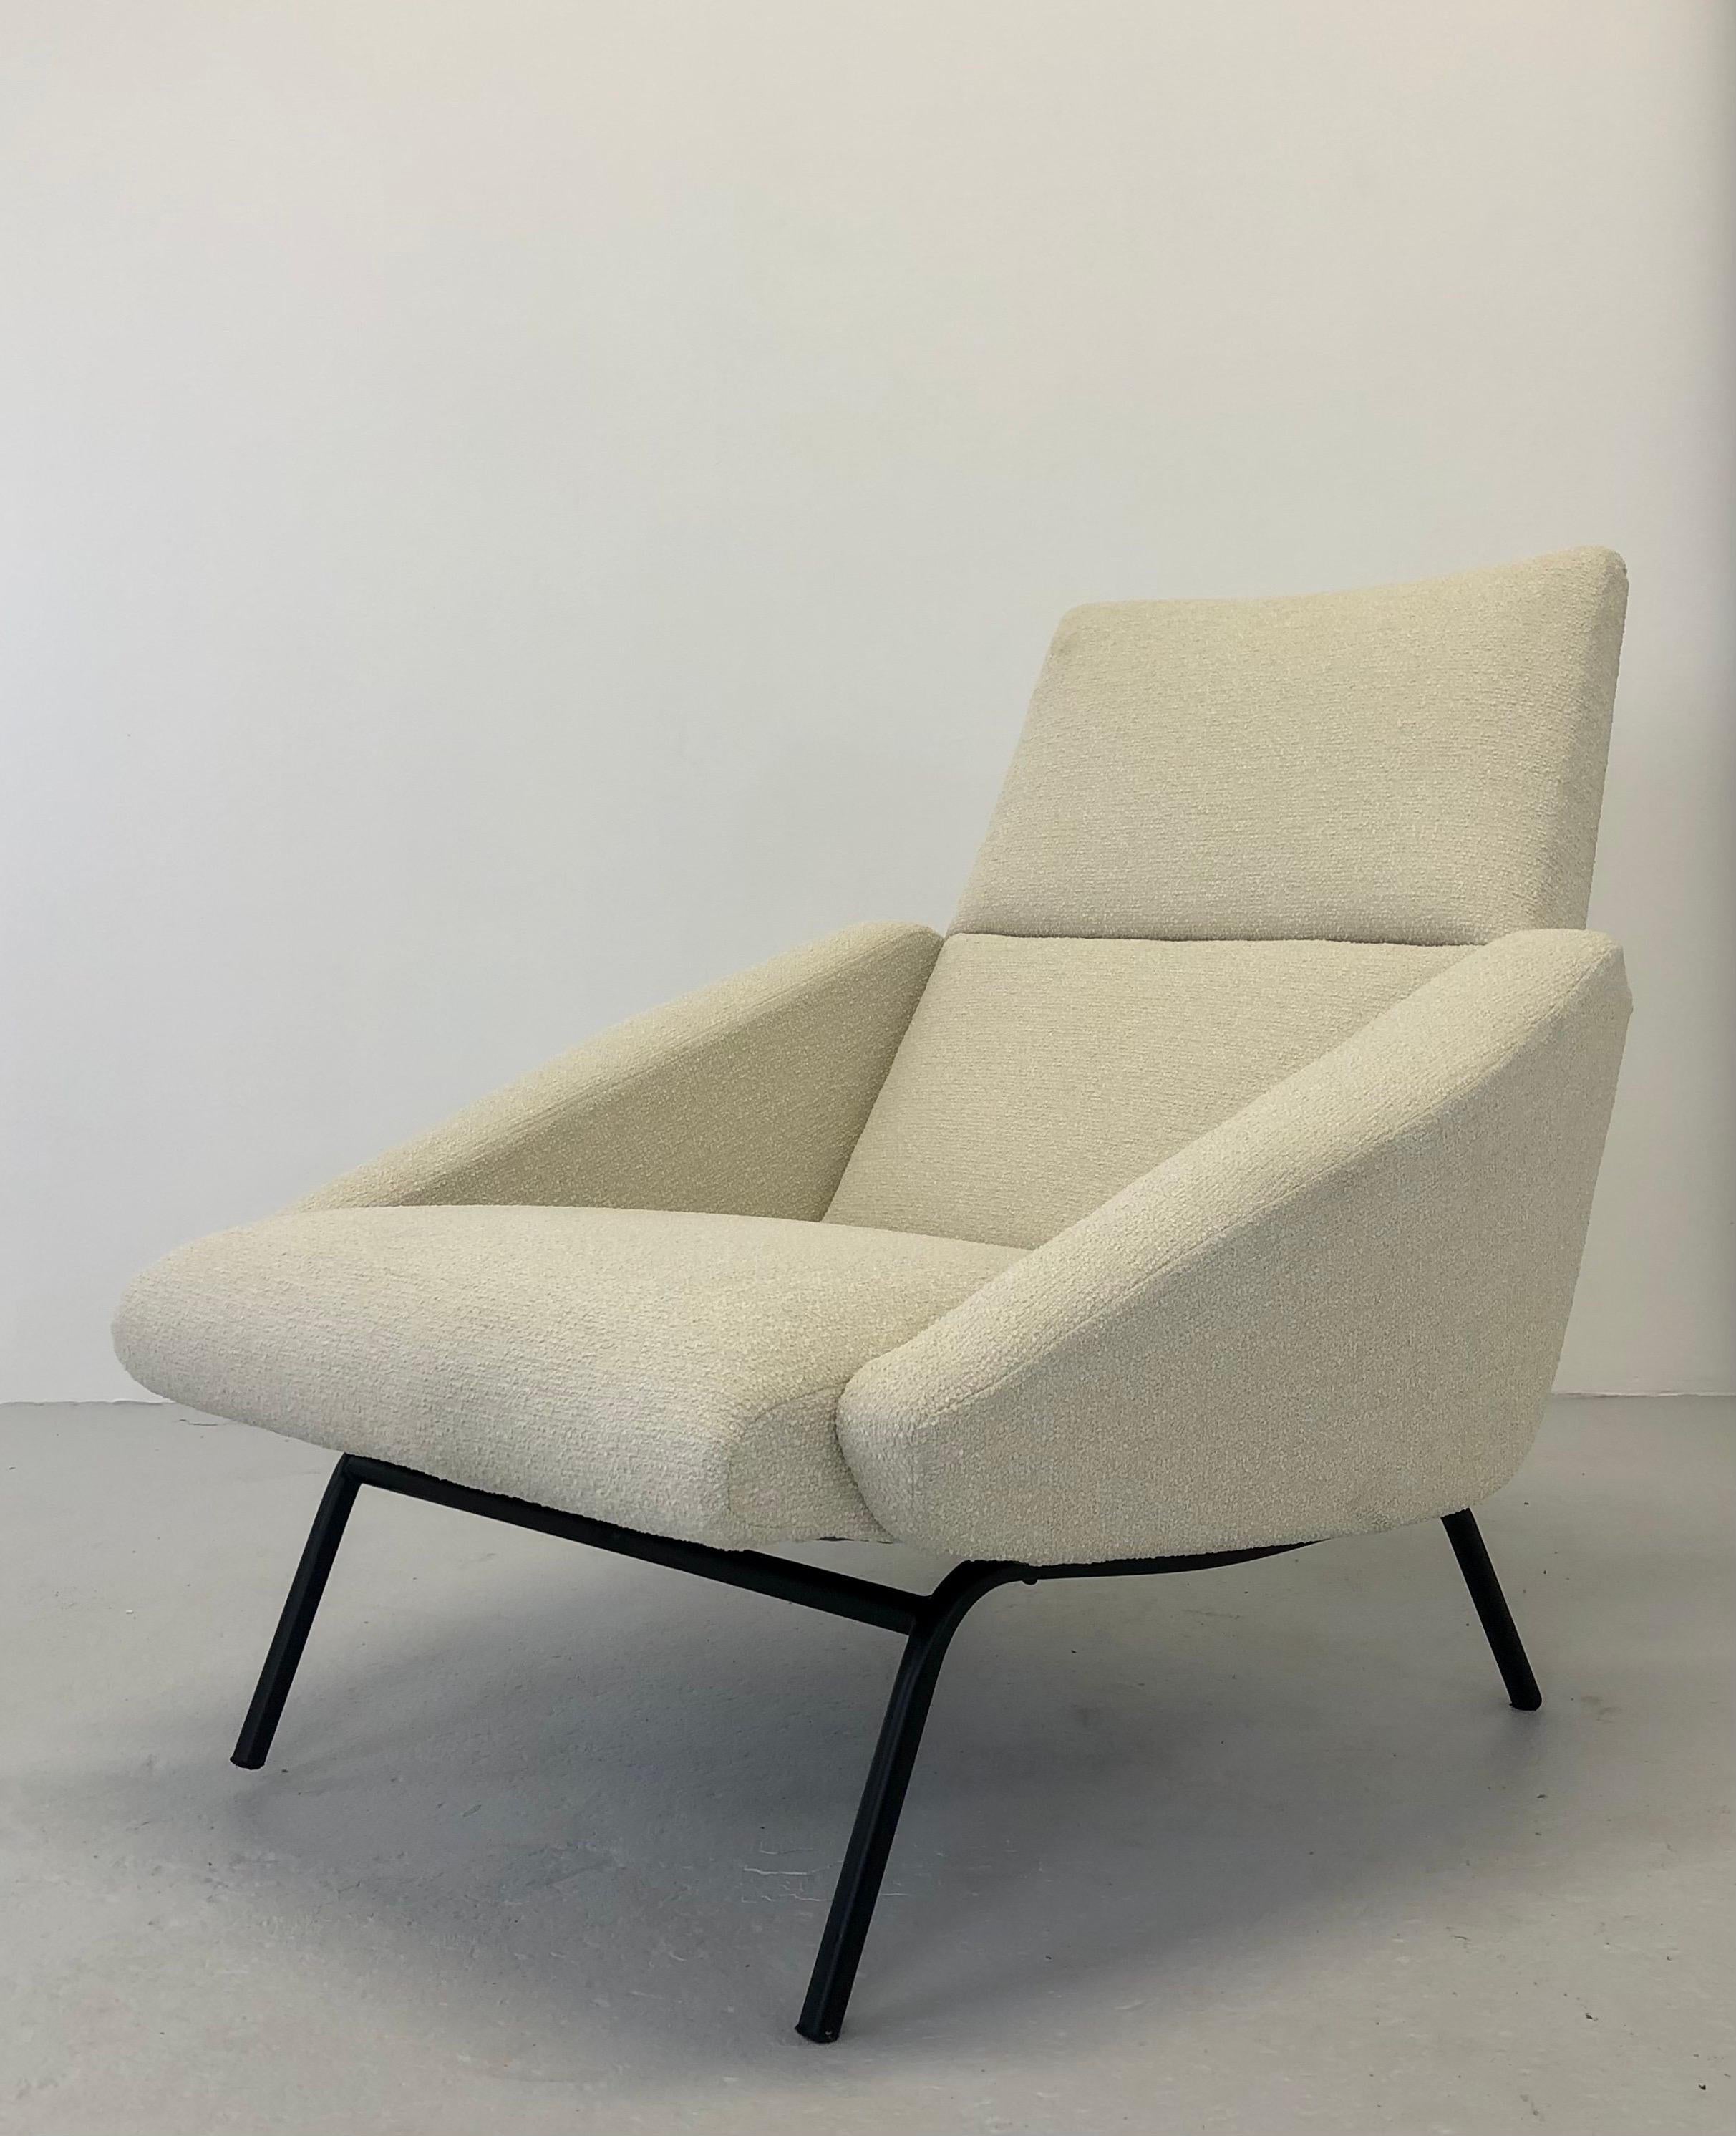 This armchair by Gérard Guermonprez, typical of 1950s furniture in France, shares similarities with the works of Pierre Paulin and Pierre Guariche, two iconic figures in design during that era. These designers embraced a modern and functional